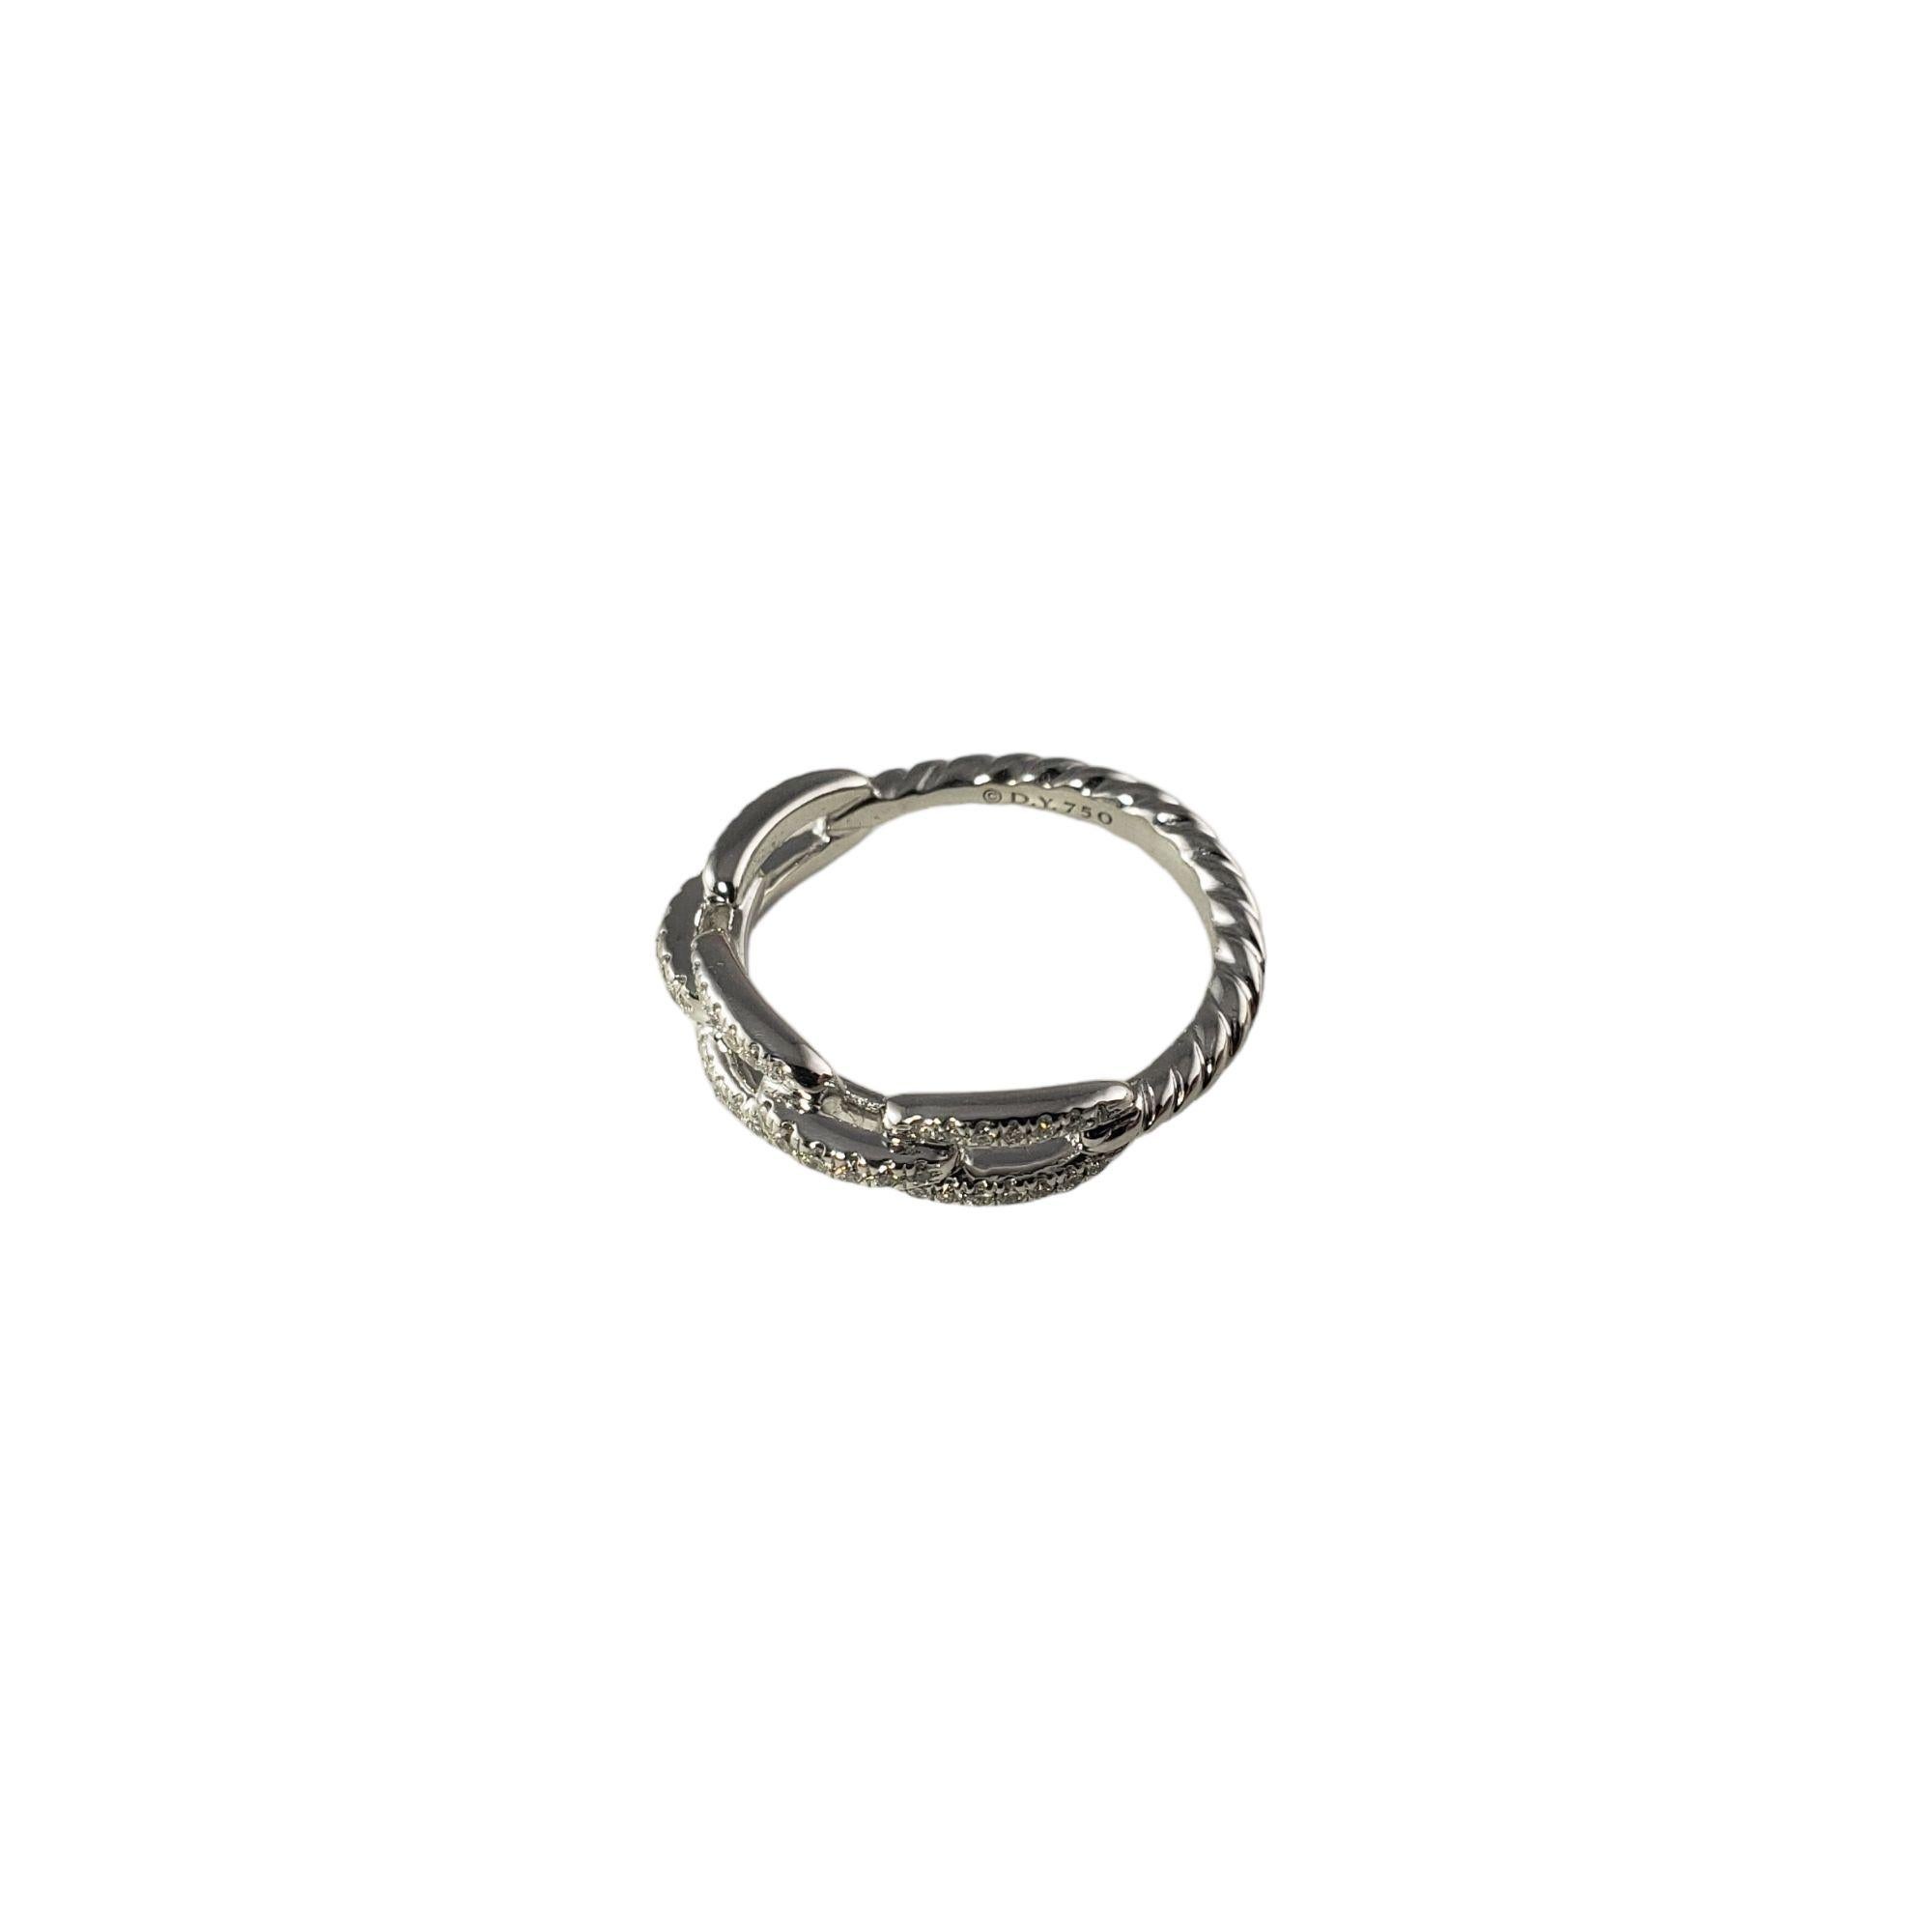 David Yurman 18 Karat White Gold and Diamond Stax Chain Link Ring Size 5-

This sparkling 18K white gold David Yurman ring is decorated with pave diamonds set in an elegant chain link design. Width: 5 mm.
Shank: 2 mm.

Approximate total diamond